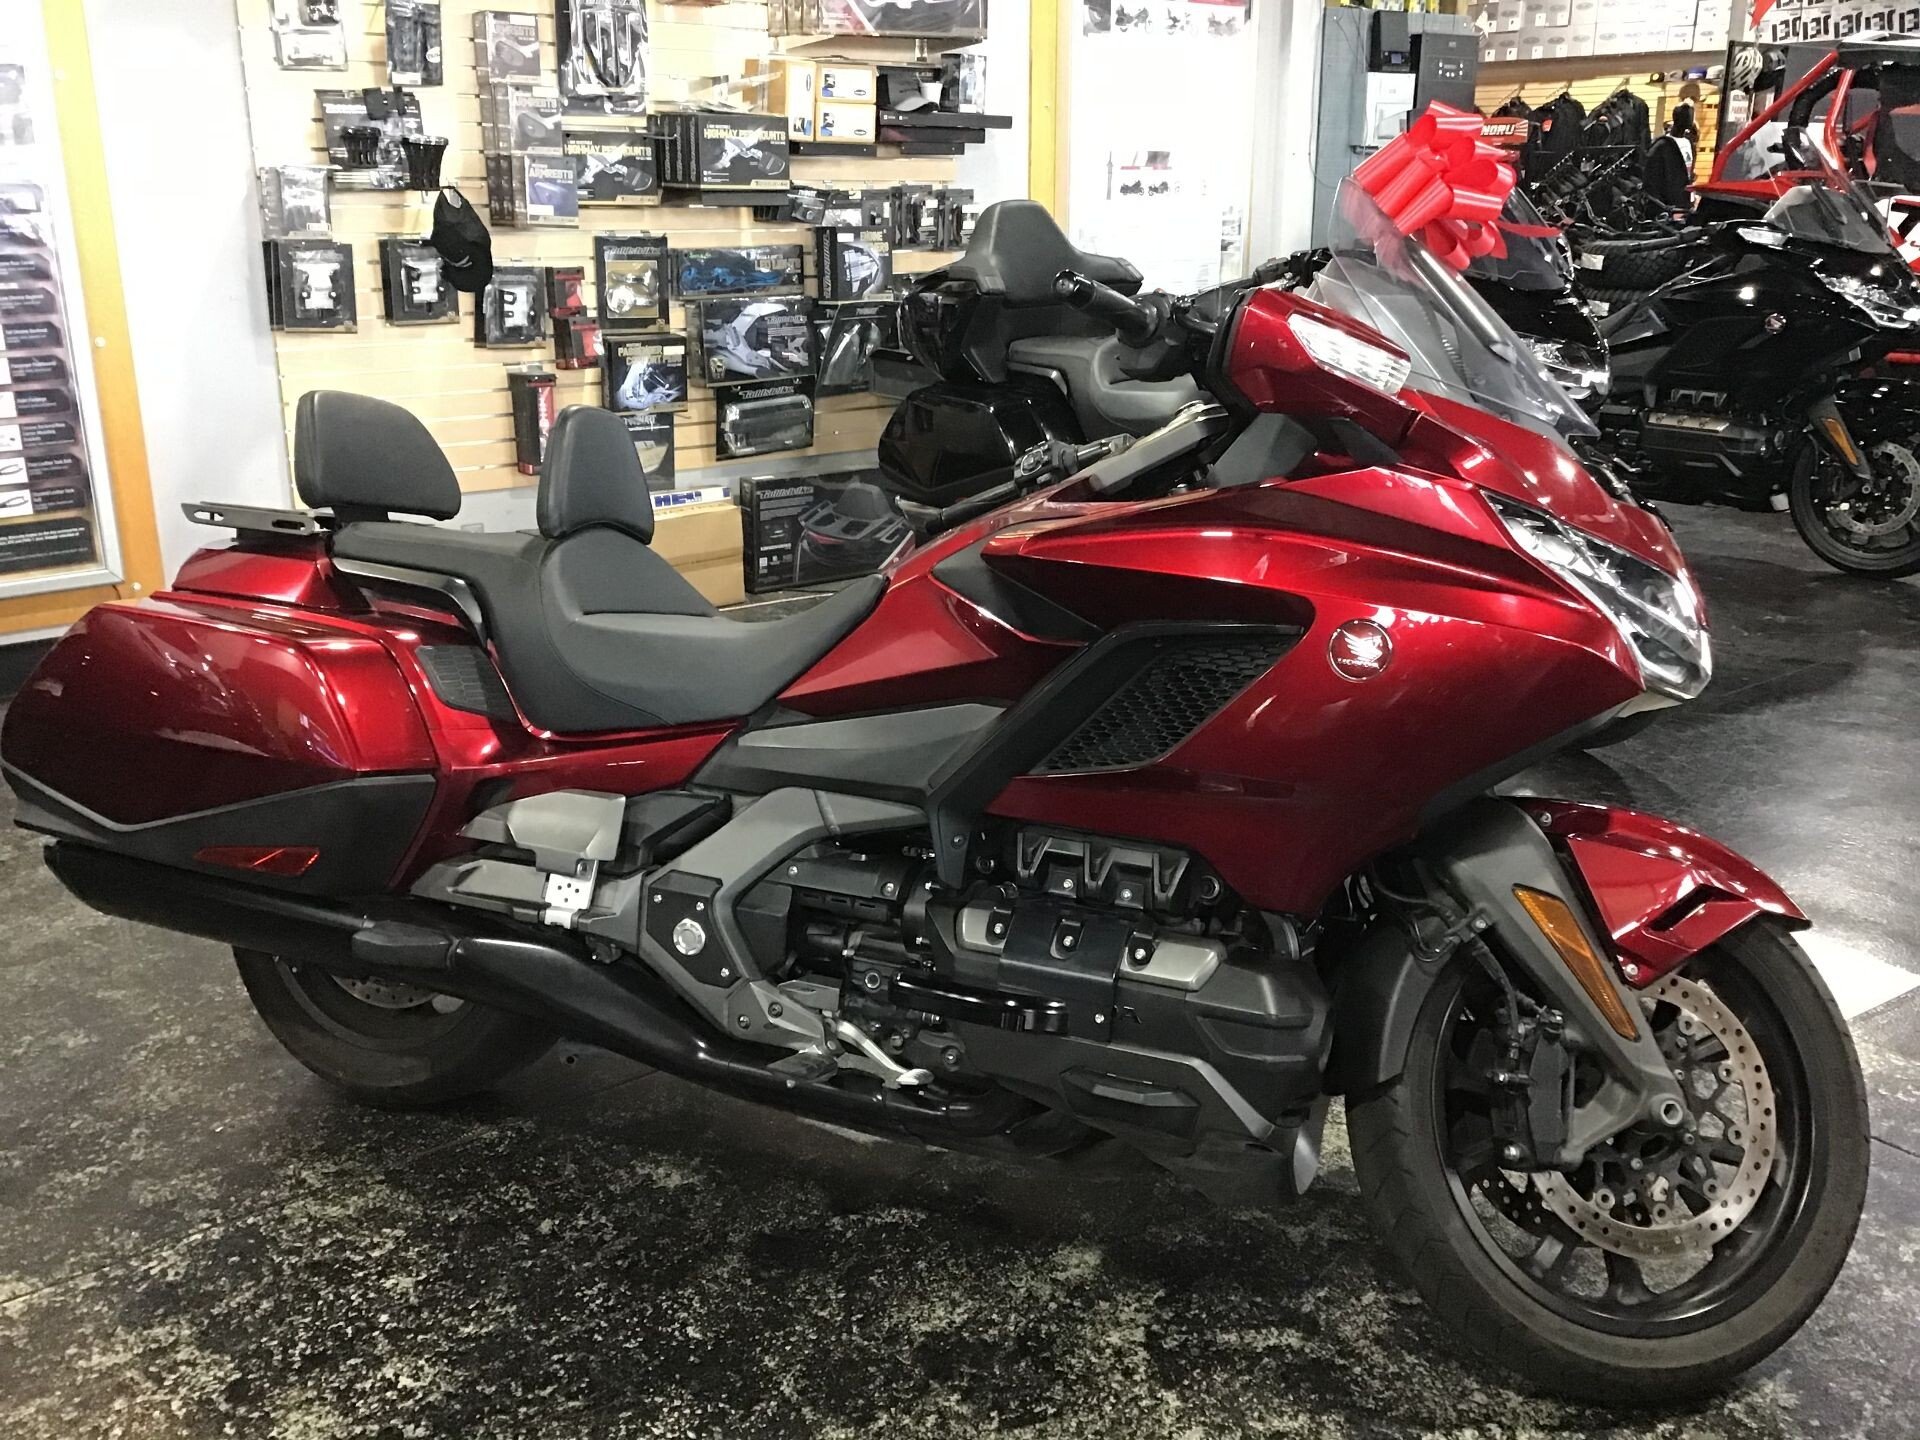 2018 Honda Gold Wing Motorcycles for Sale - Motorcycles on ...